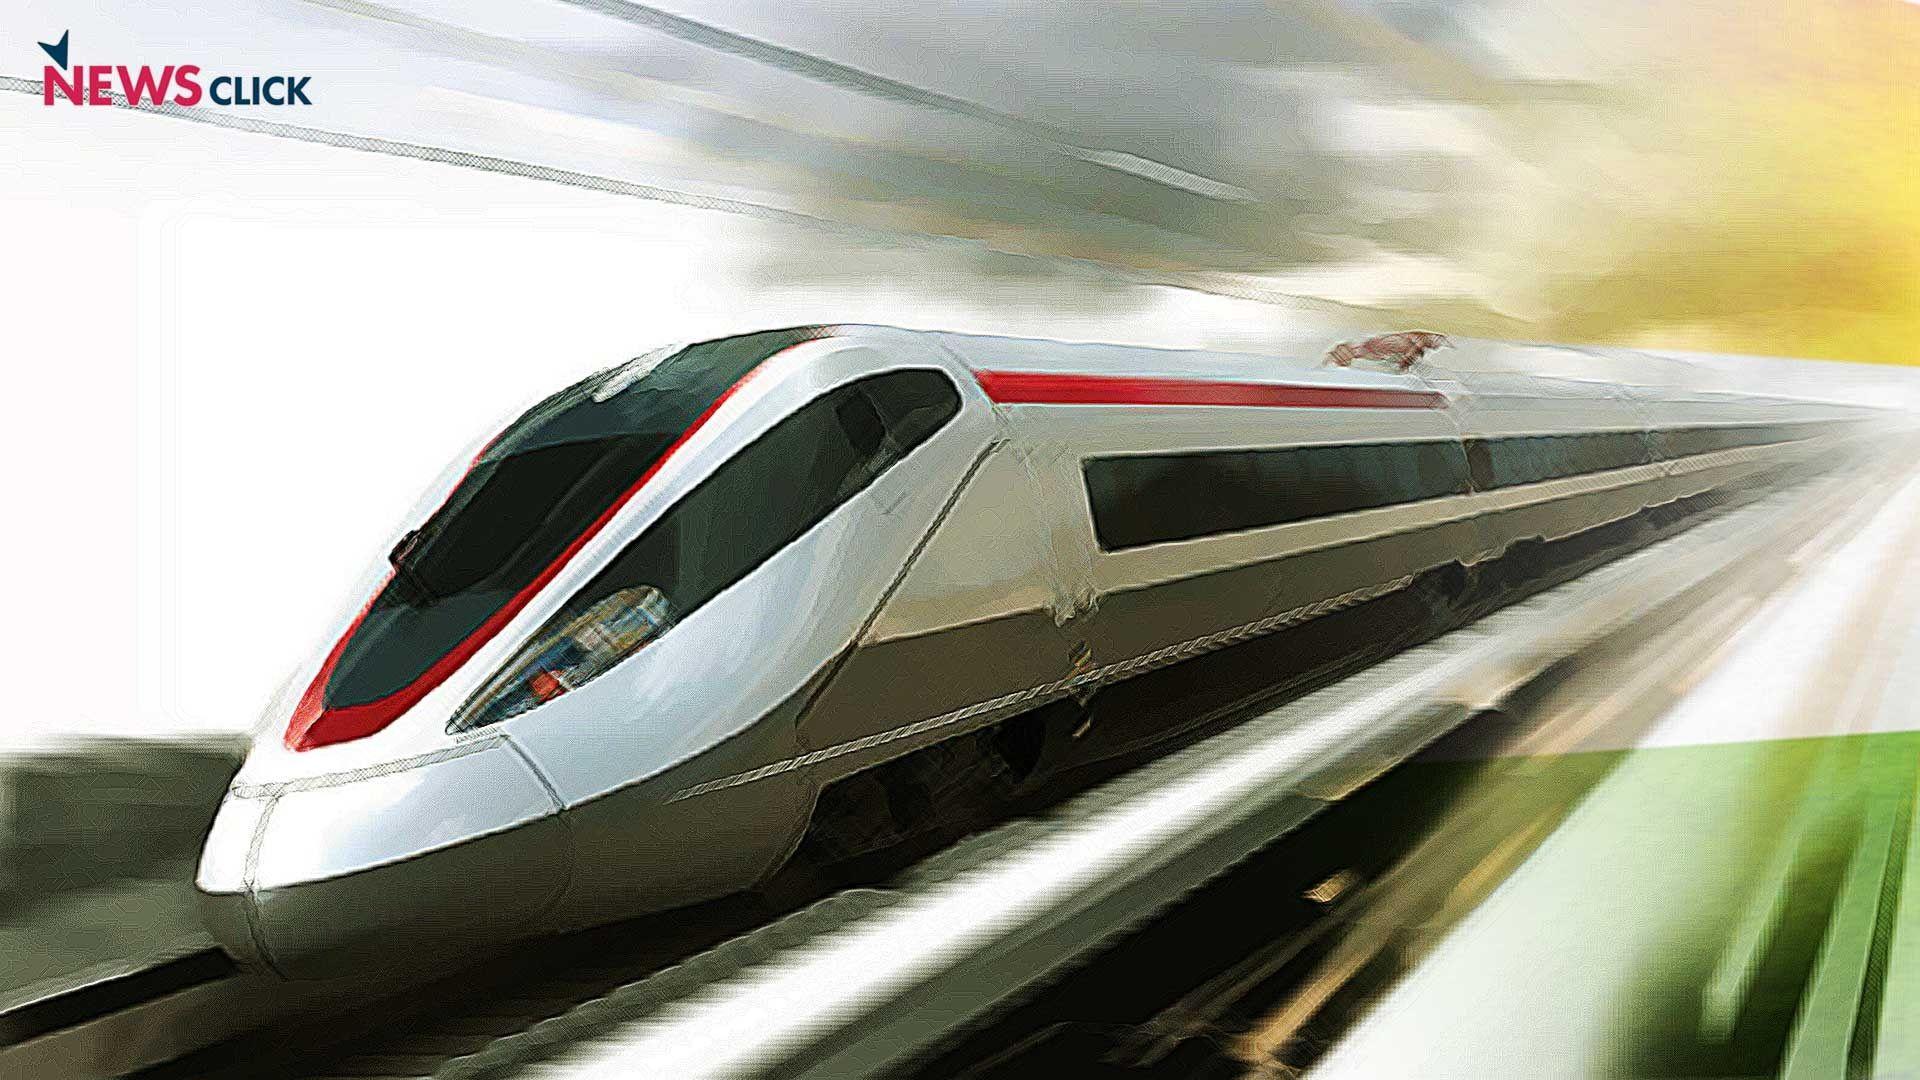 HD wallpaper white and red bullet train The sky Clouds Speed Movement   Wallpaper Flare